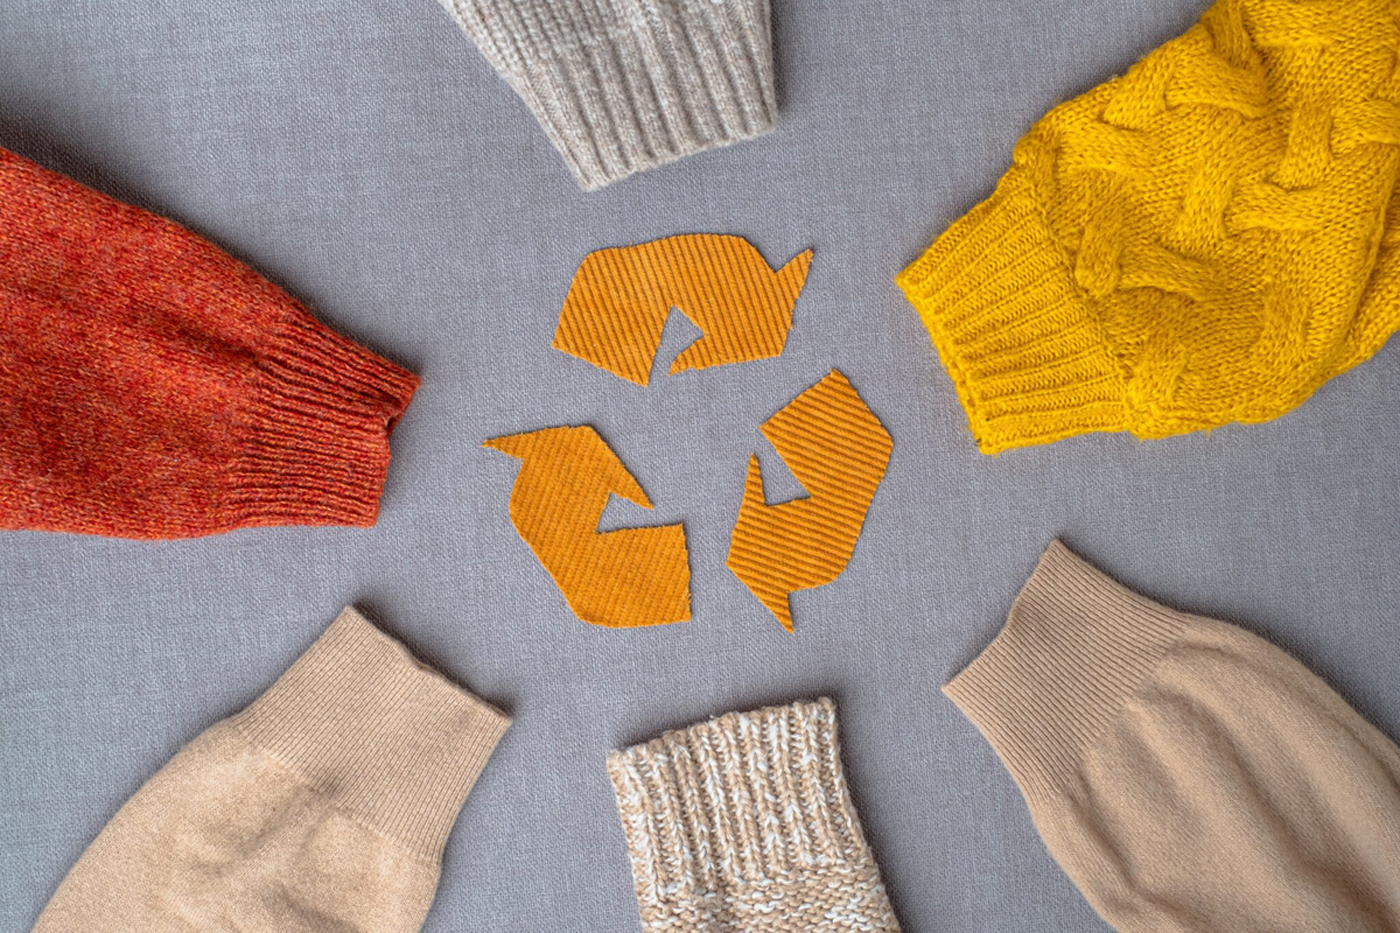 Circular economy approach for US textiles